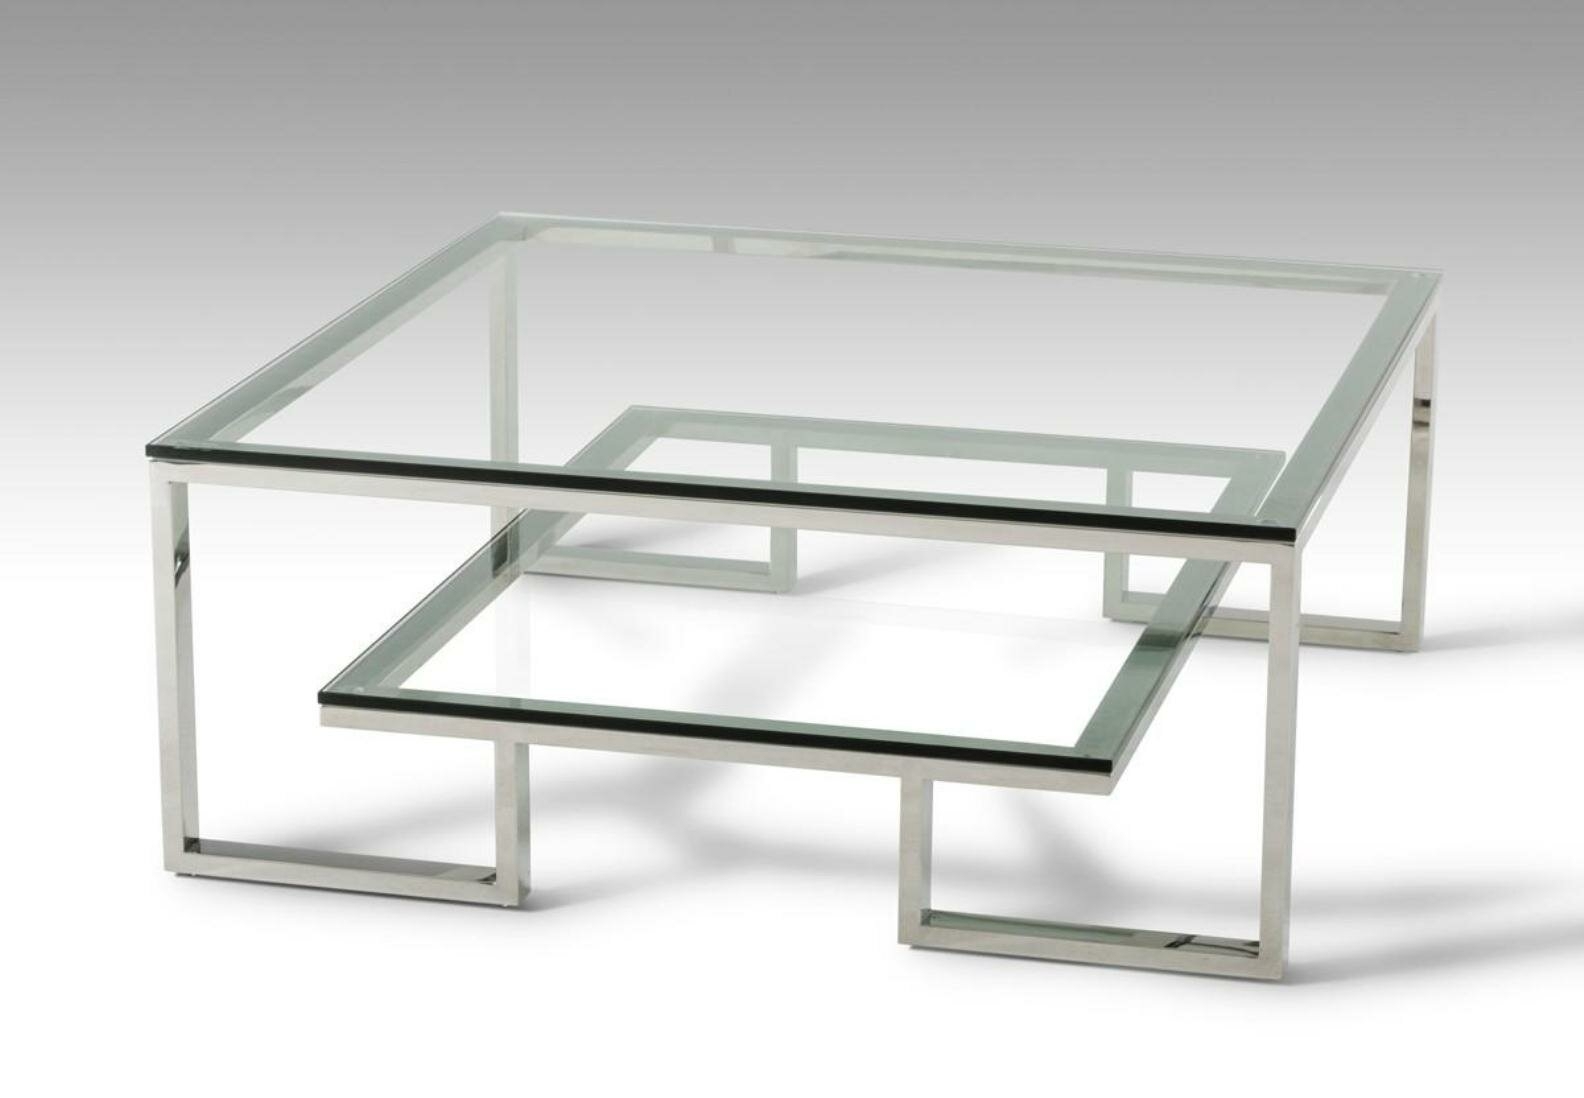 Using Square Glass Tables In Small Living Room